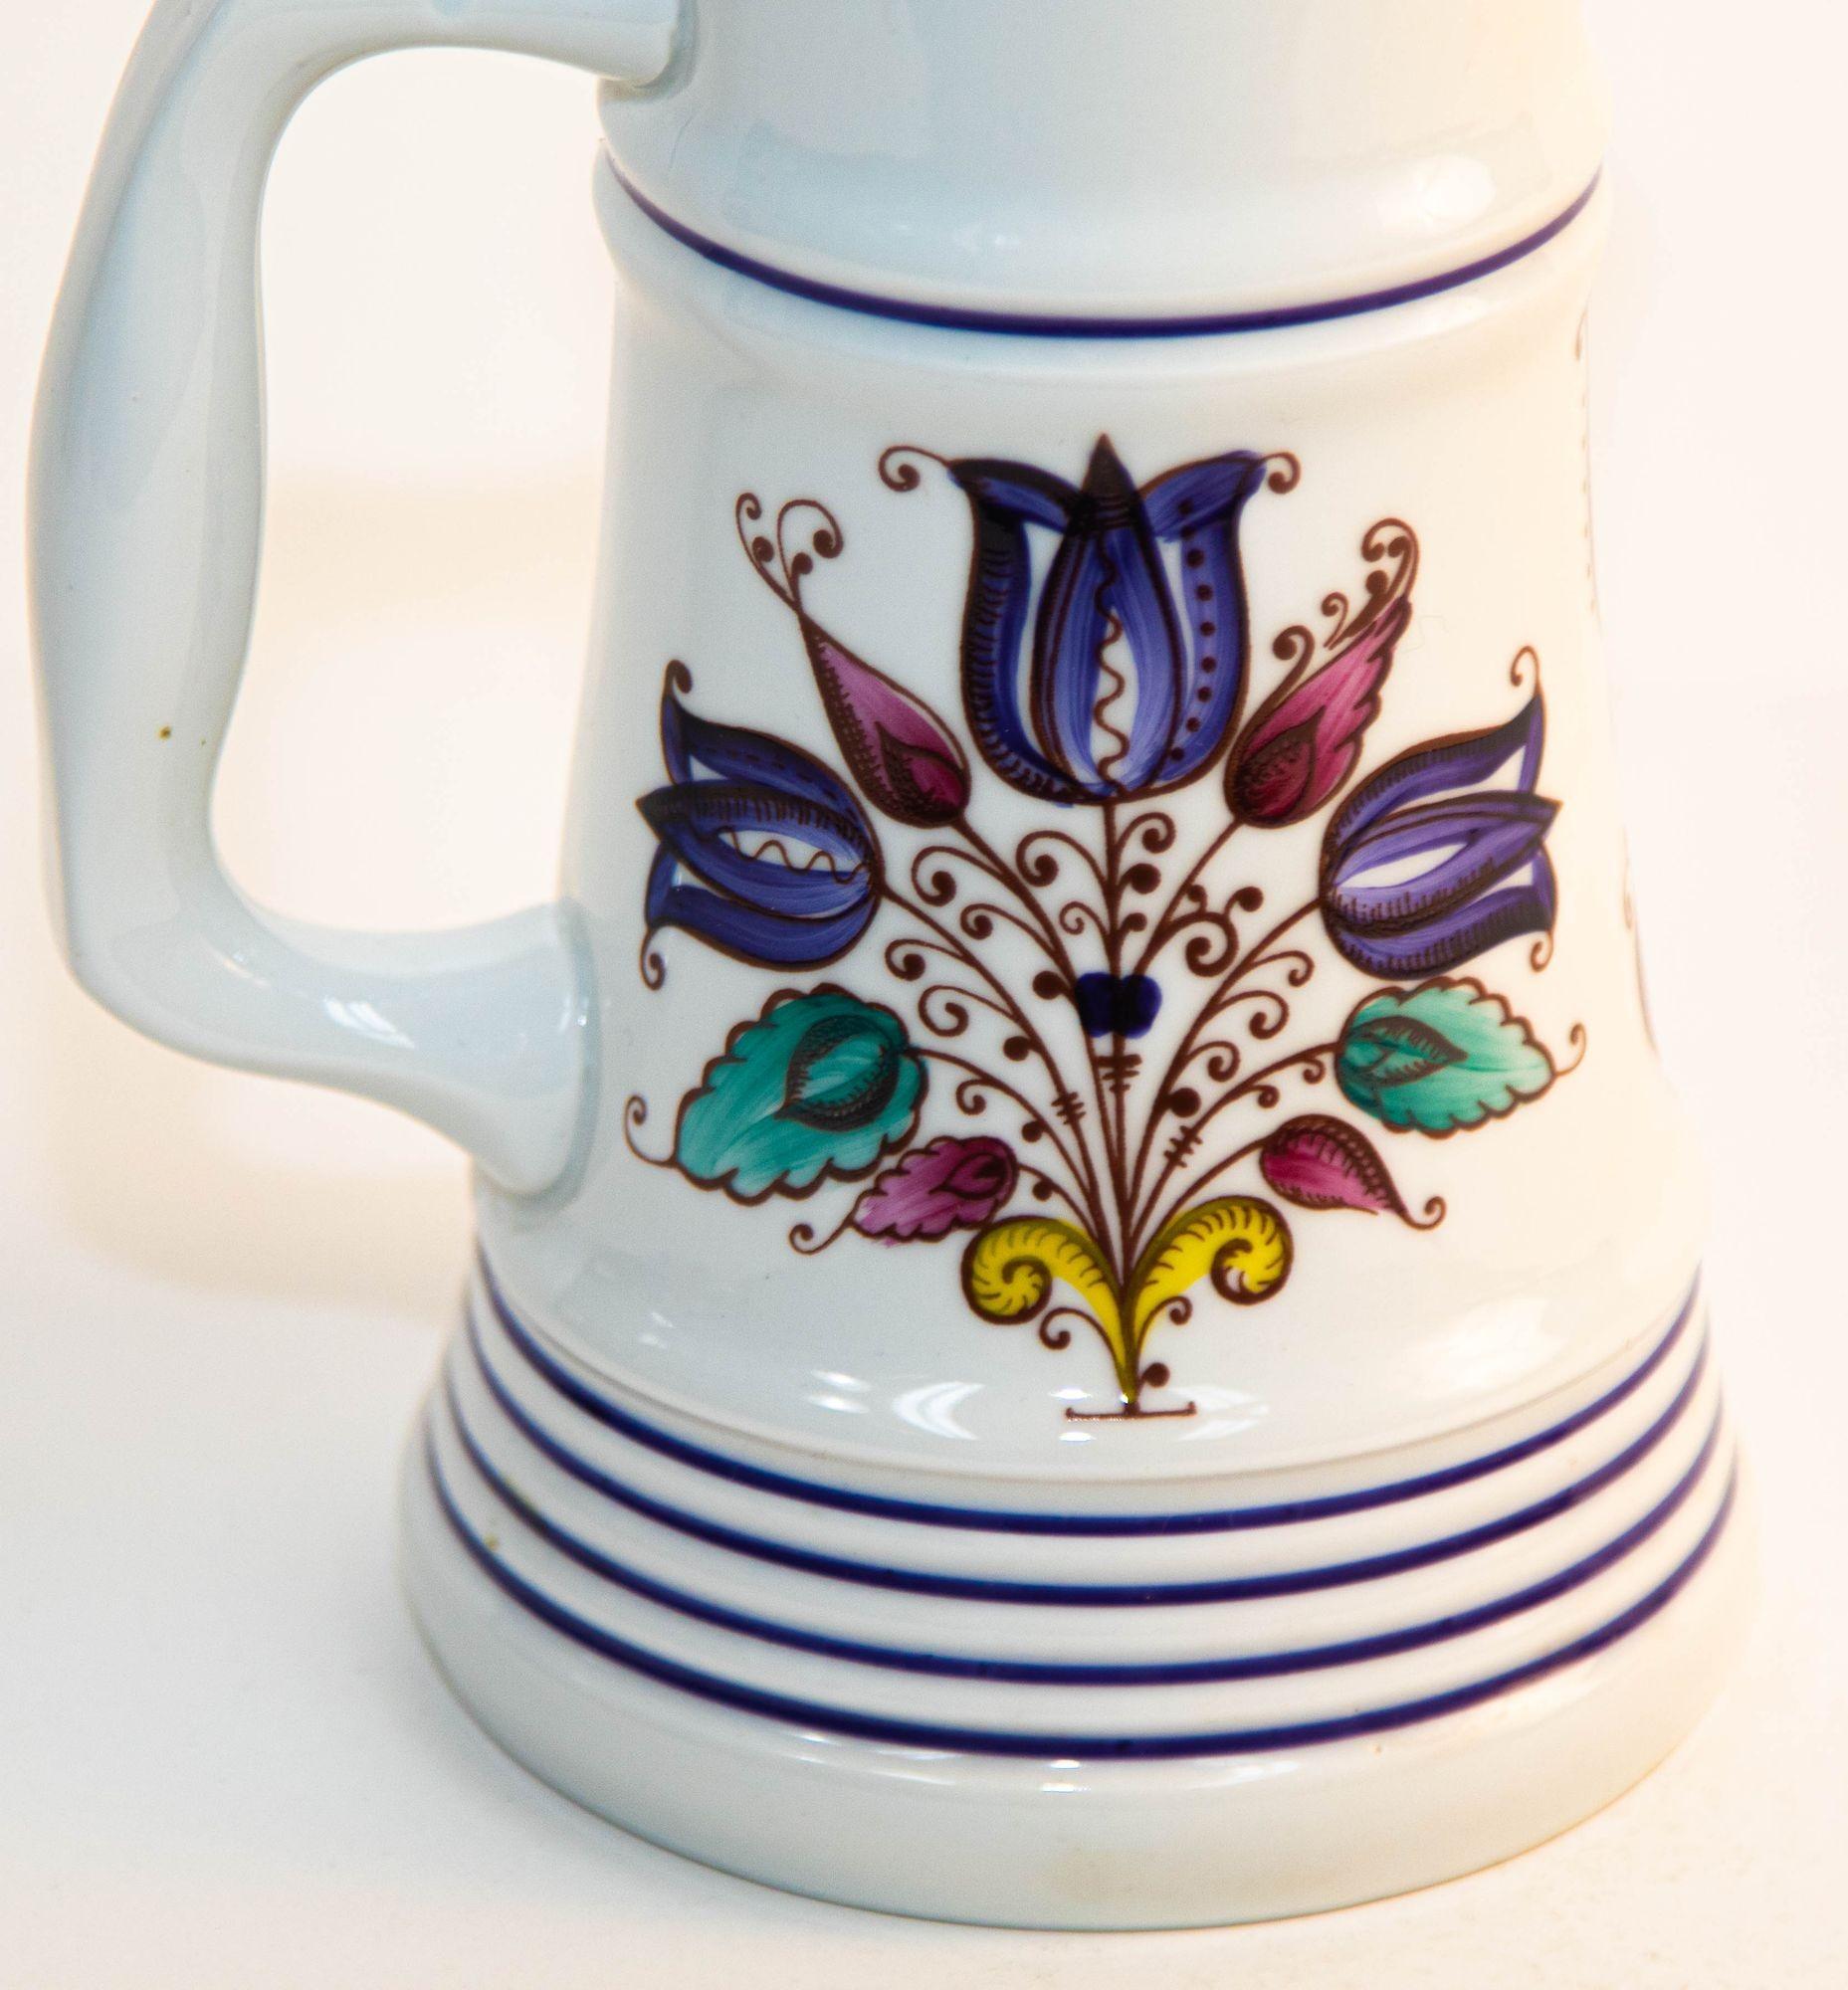 Hungarian Vintage Alfoldi Porcelain Hungary Hand Painted Pitcher Vase For Sale